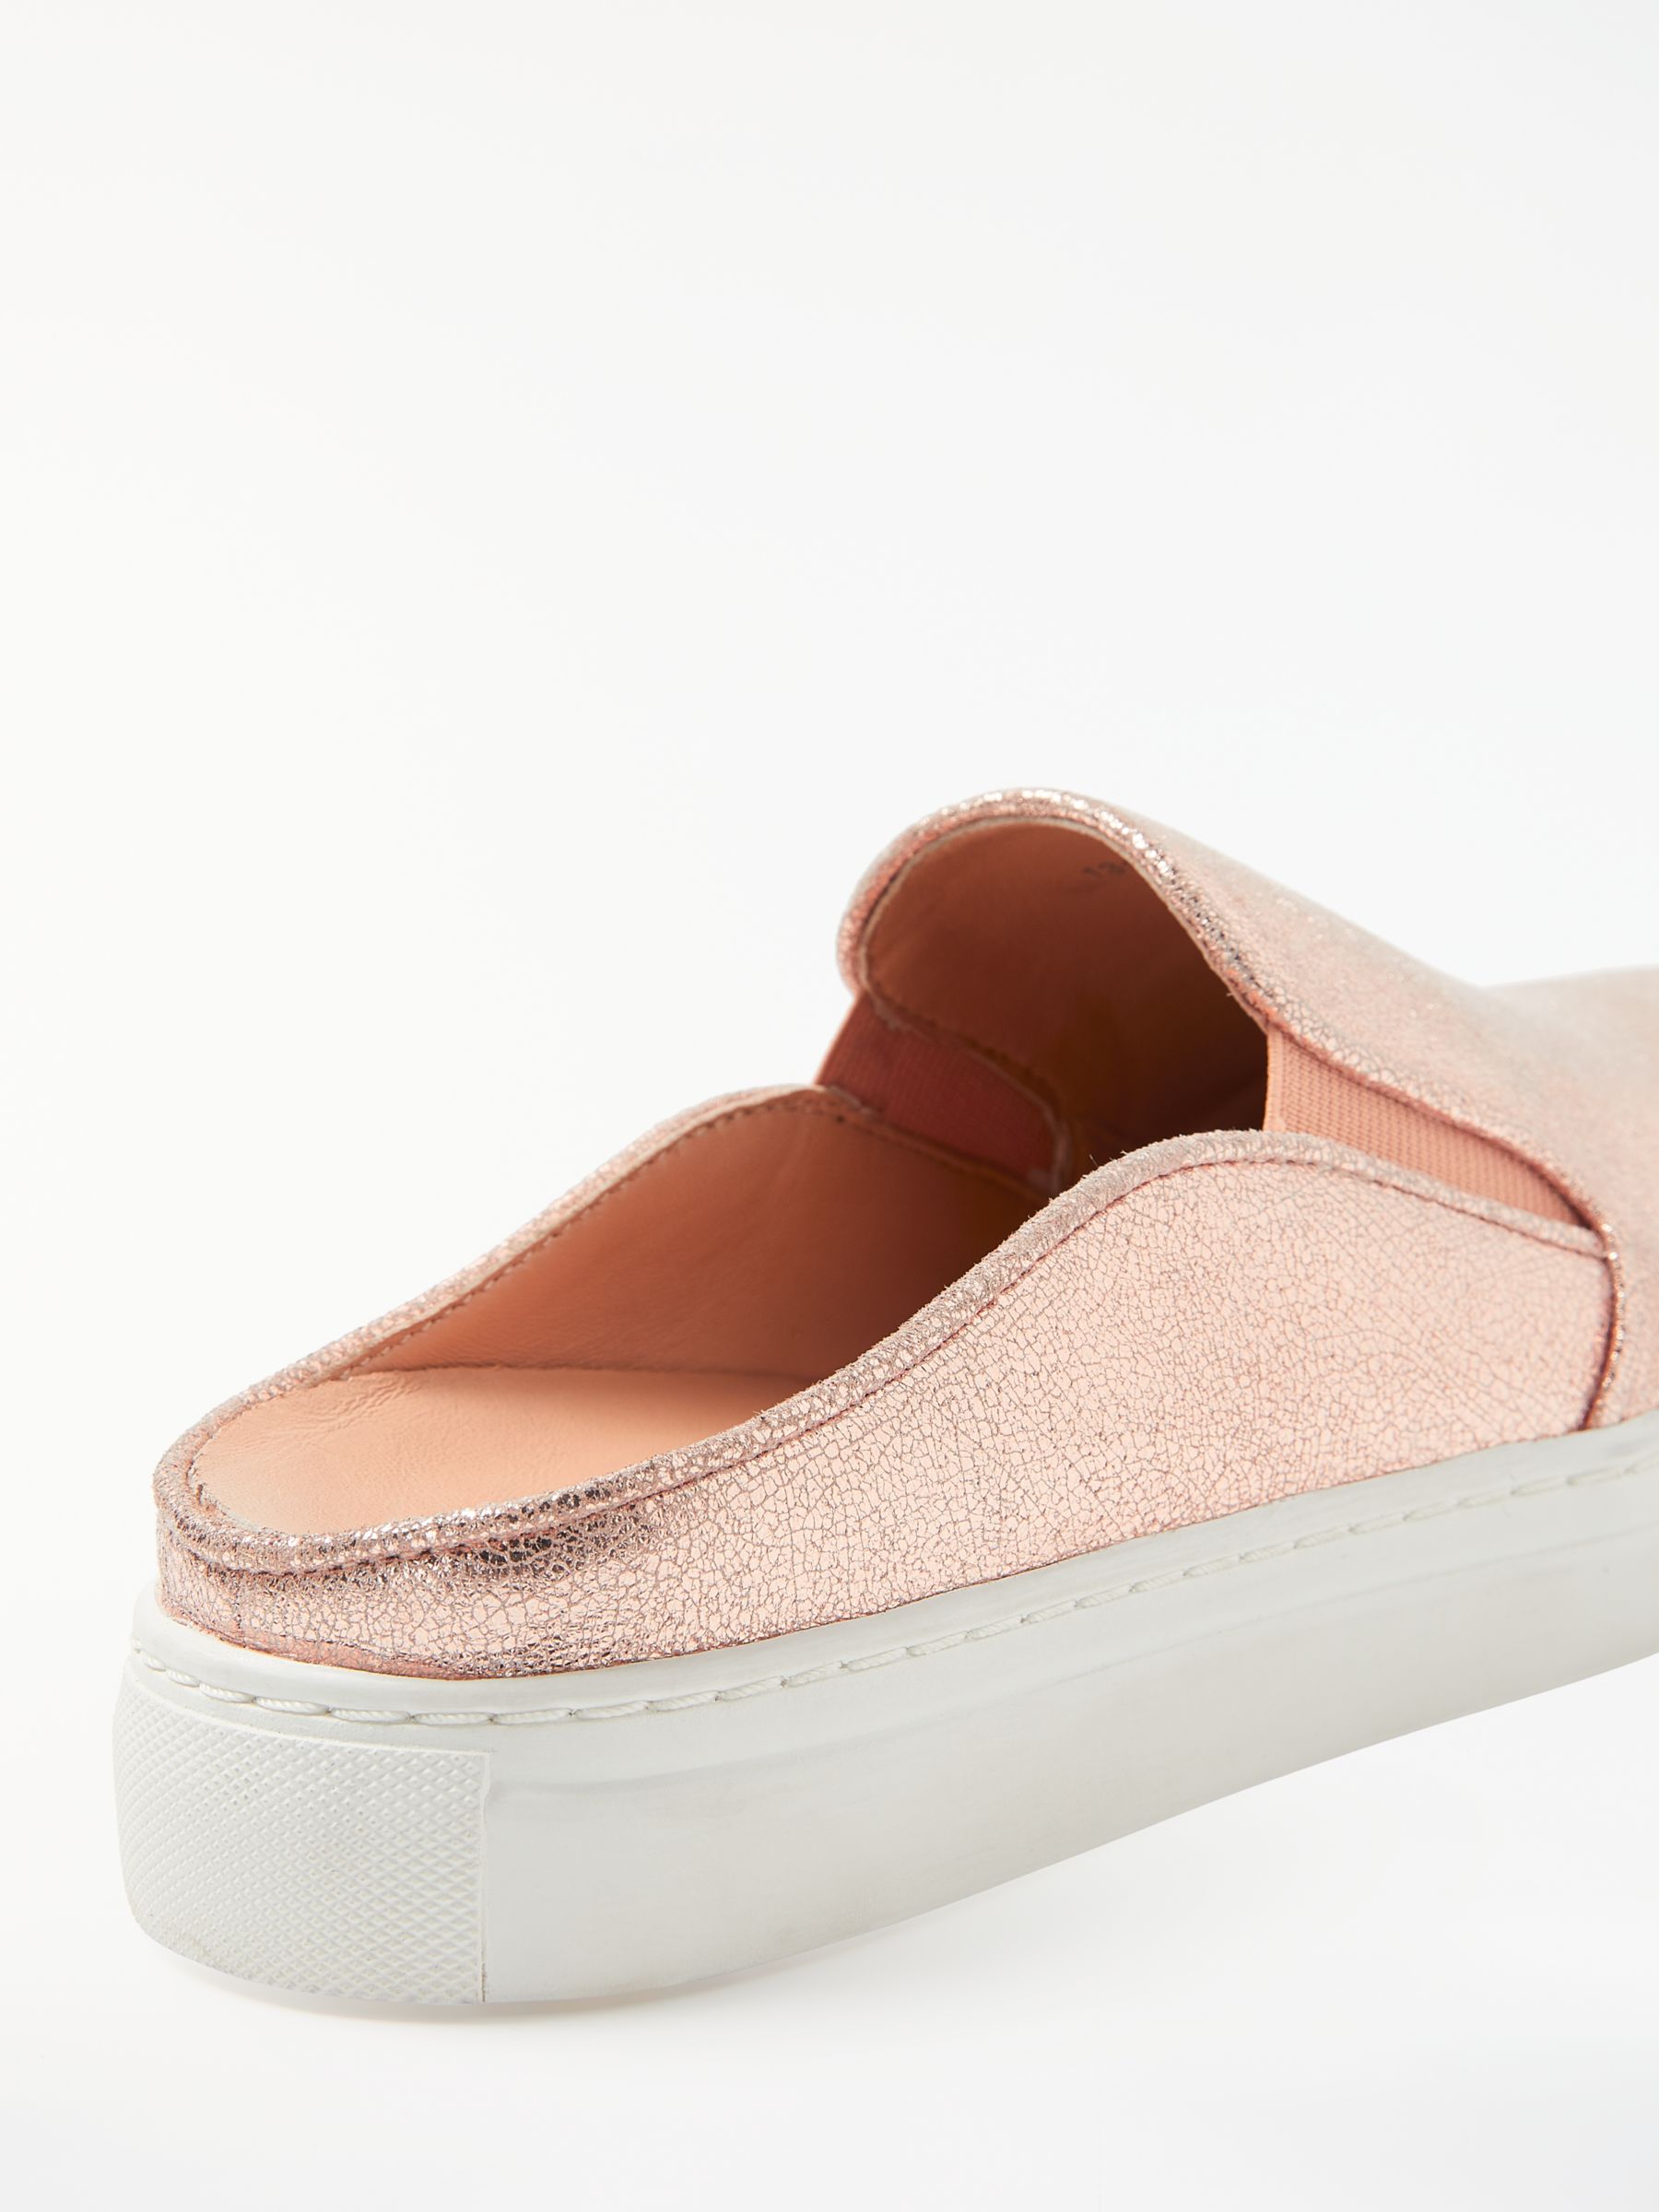 John Lewis Slip On Backless Trainers 